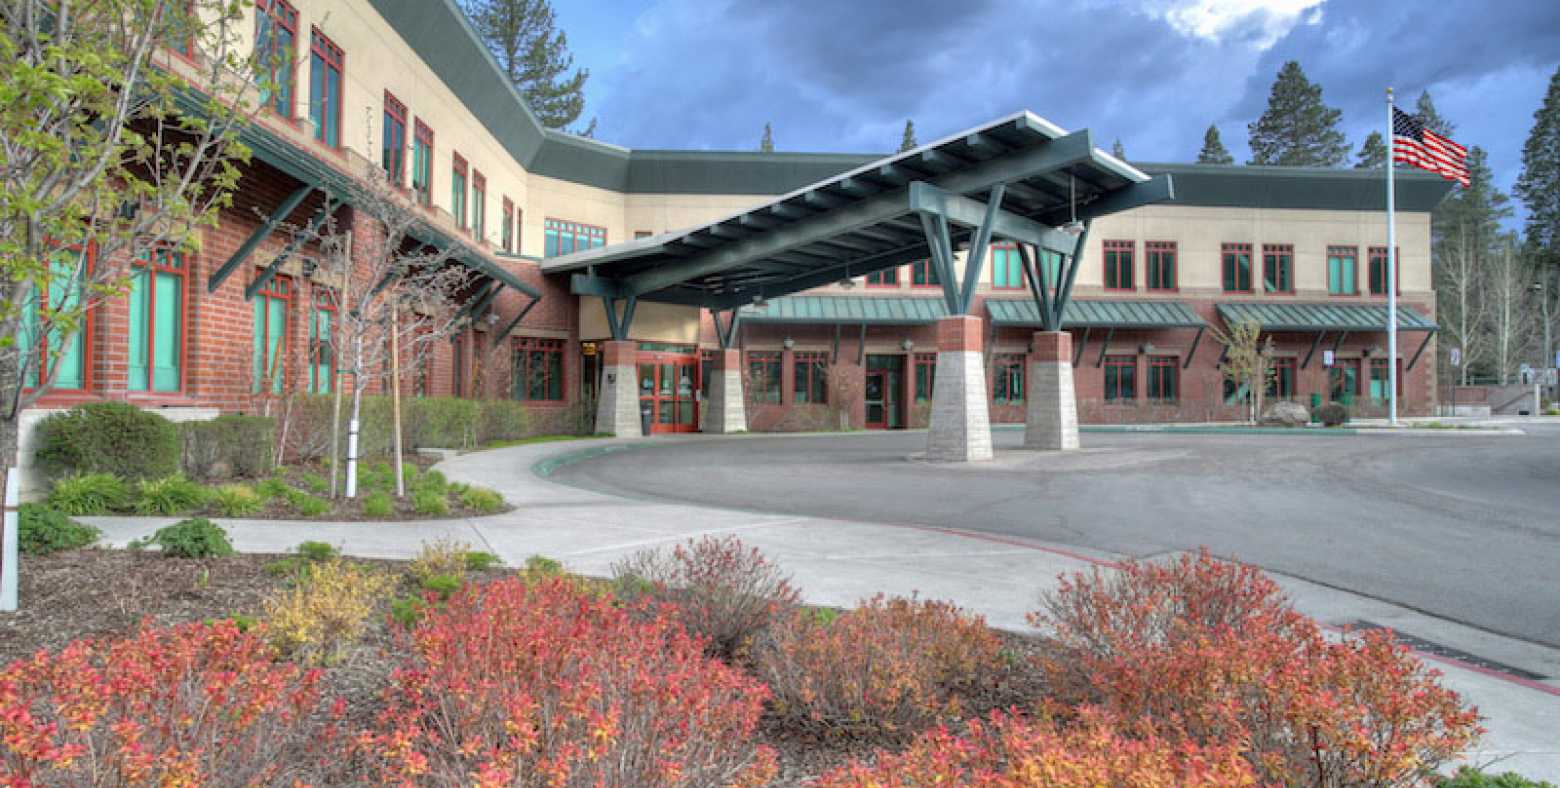 Tahoe Forest Hospital Exterior in fall setting